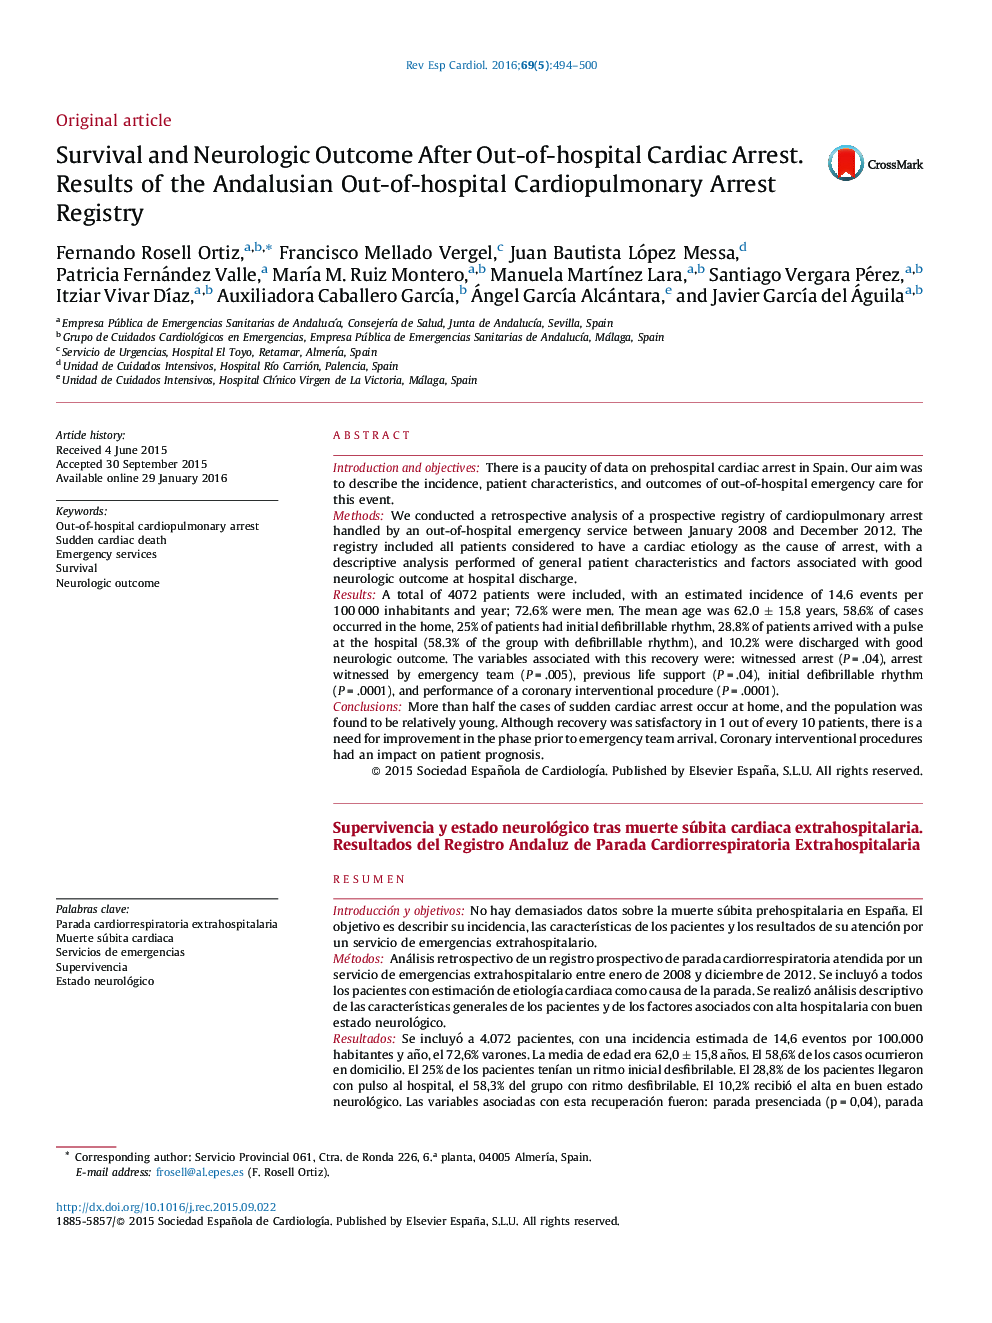 Survival and Neurologic Outcome After Out-of-hospital Cardiac Arrest. Results of the Andalusian Out-of-hospital Cardiopulmonary Arrest Registry